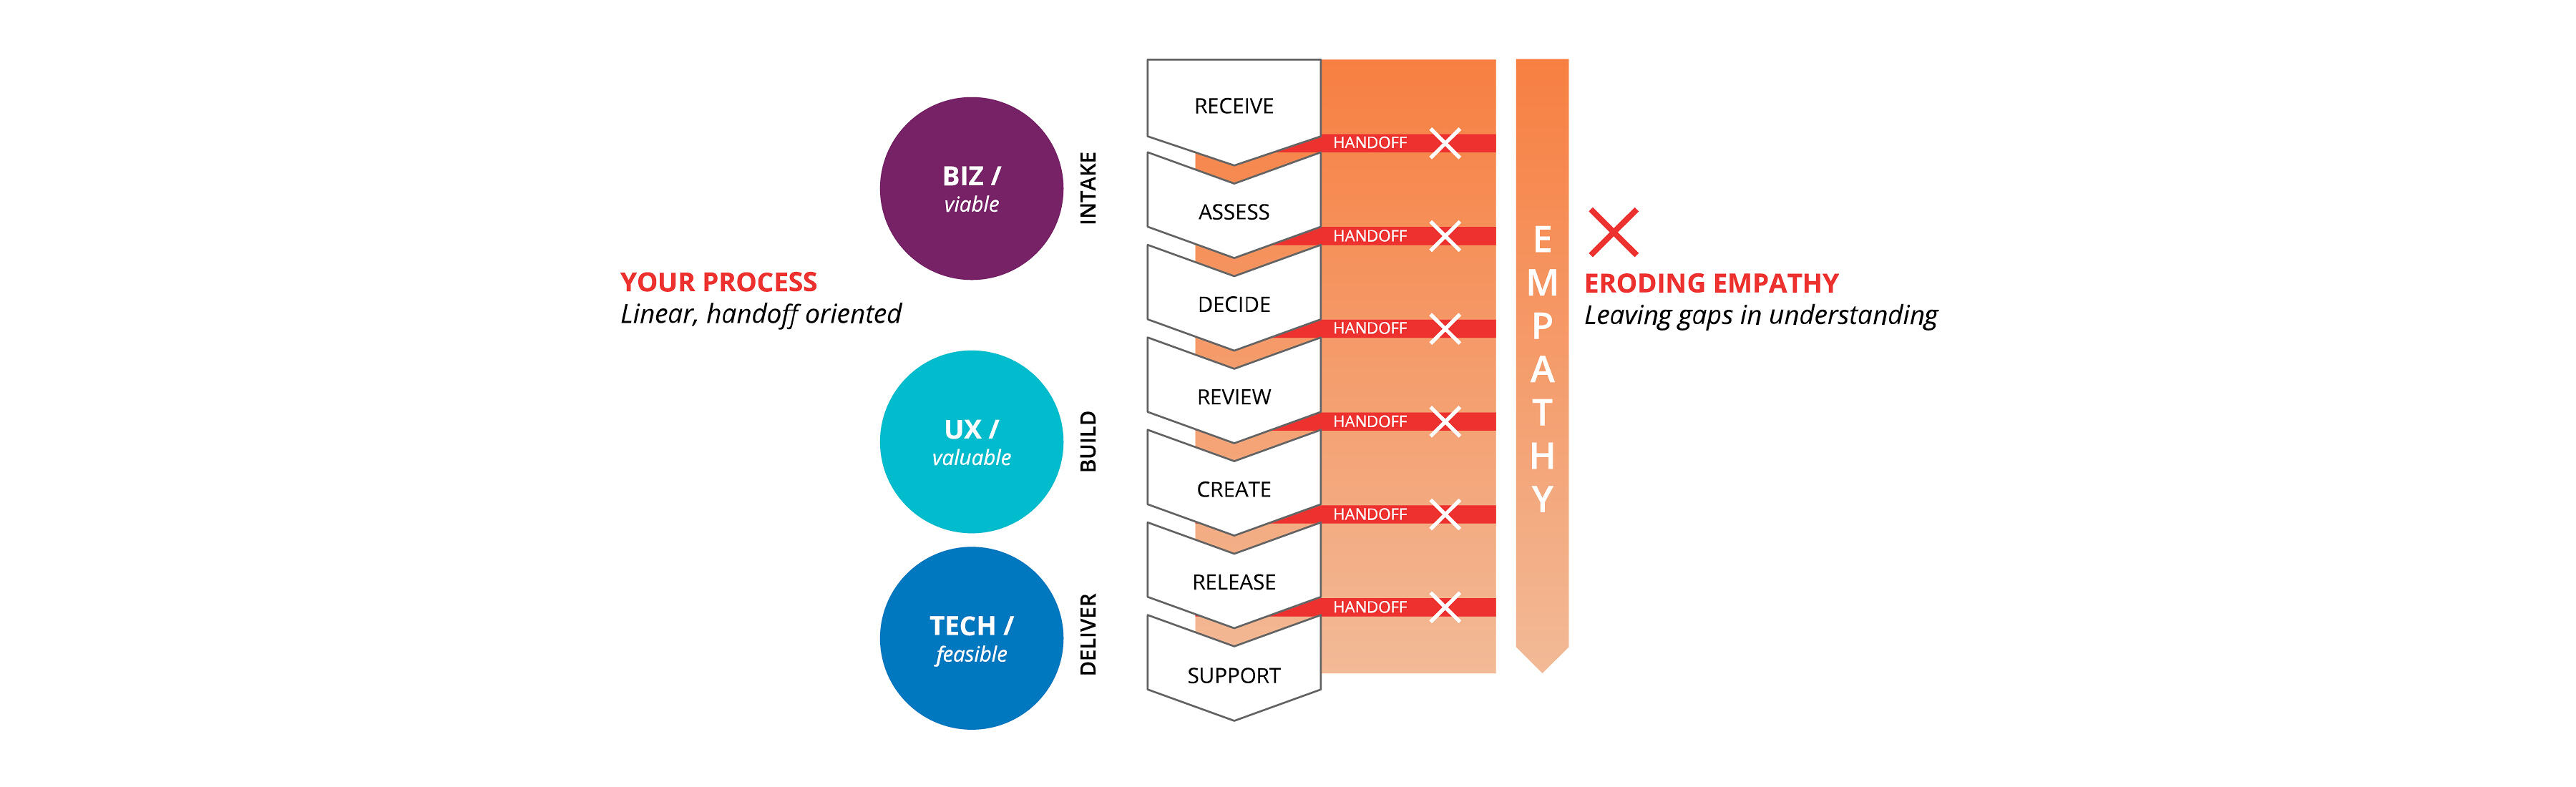 A linear, handoff oriented process: The lenses of innovation are indicated on the left in circles, beginning with Biz/viable, UX/valuable, and lastly Tech/feasible. The middle section of the diagram indicates the stages of a process: Business intake (receive, assess, decide), UX build (review, create), and Tech deliver (create, release, support). The division of theses process stages is indicated by spacing and a series of boxes. On the right the word "Empathy" runs down inside an arrow. These processes and the arrow are each filled with a gradient that indicates that empathy and understanding are eroded through these handoff oriented processes.